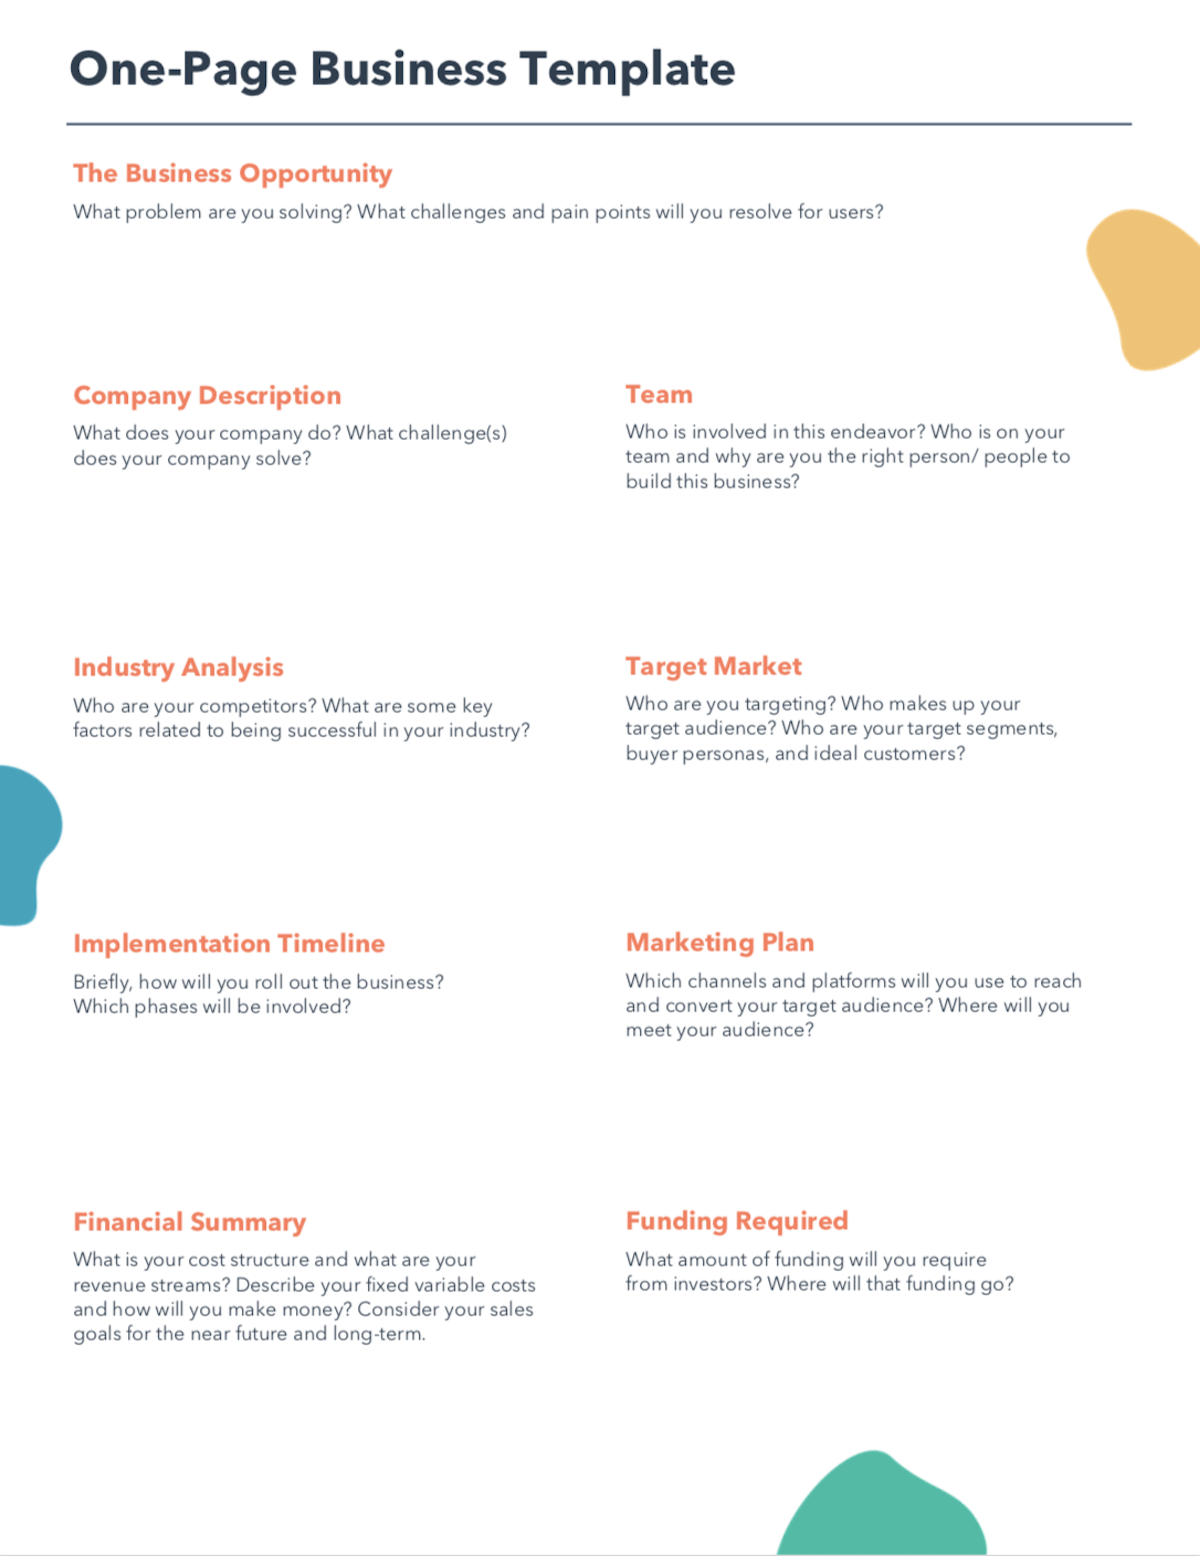 Free One Page Business Plan Template for PDF  Word  HubSpot Regarding Simple Startup Business Plan Template